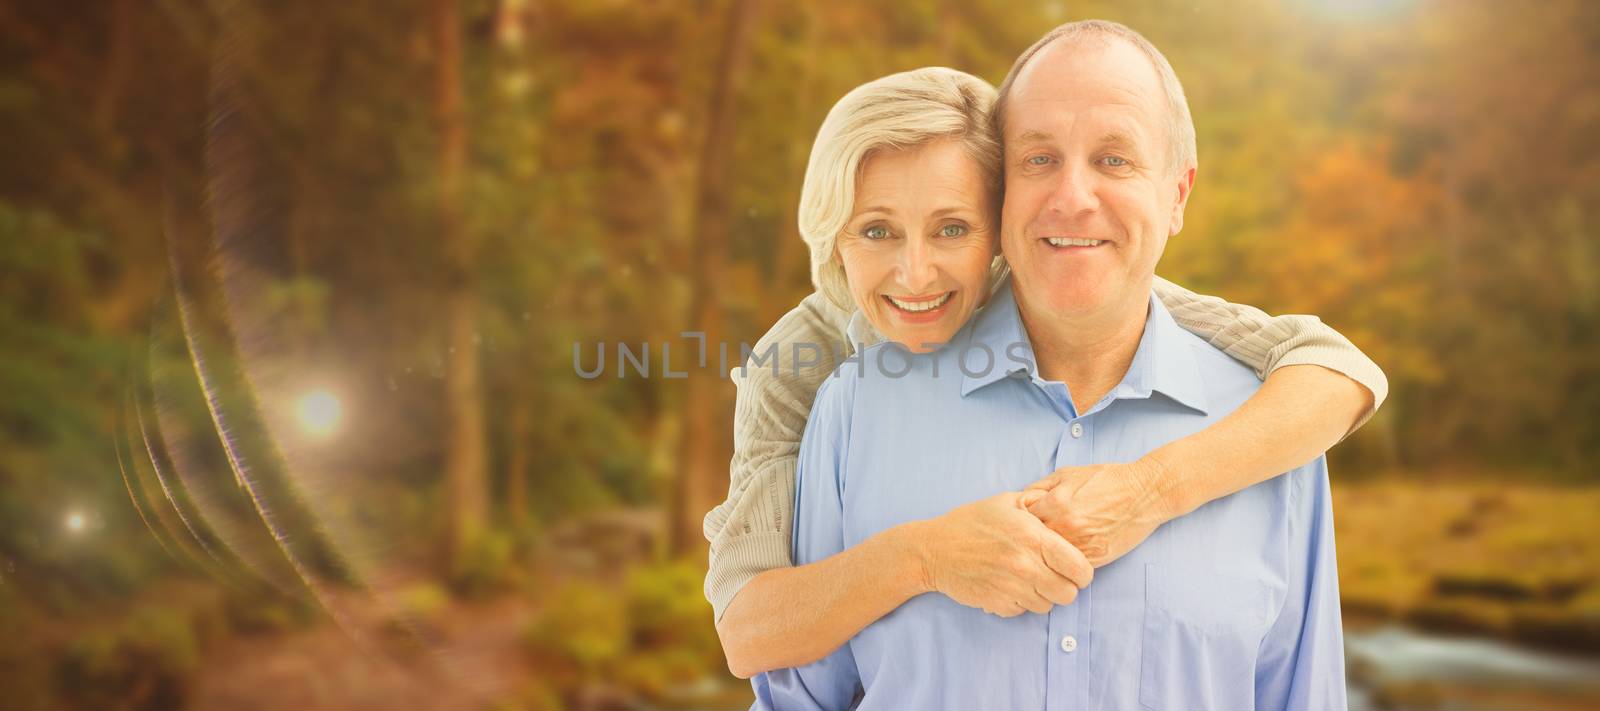 Composite image of happy mature couple embracing smiling at camera by Wavebreakmedia